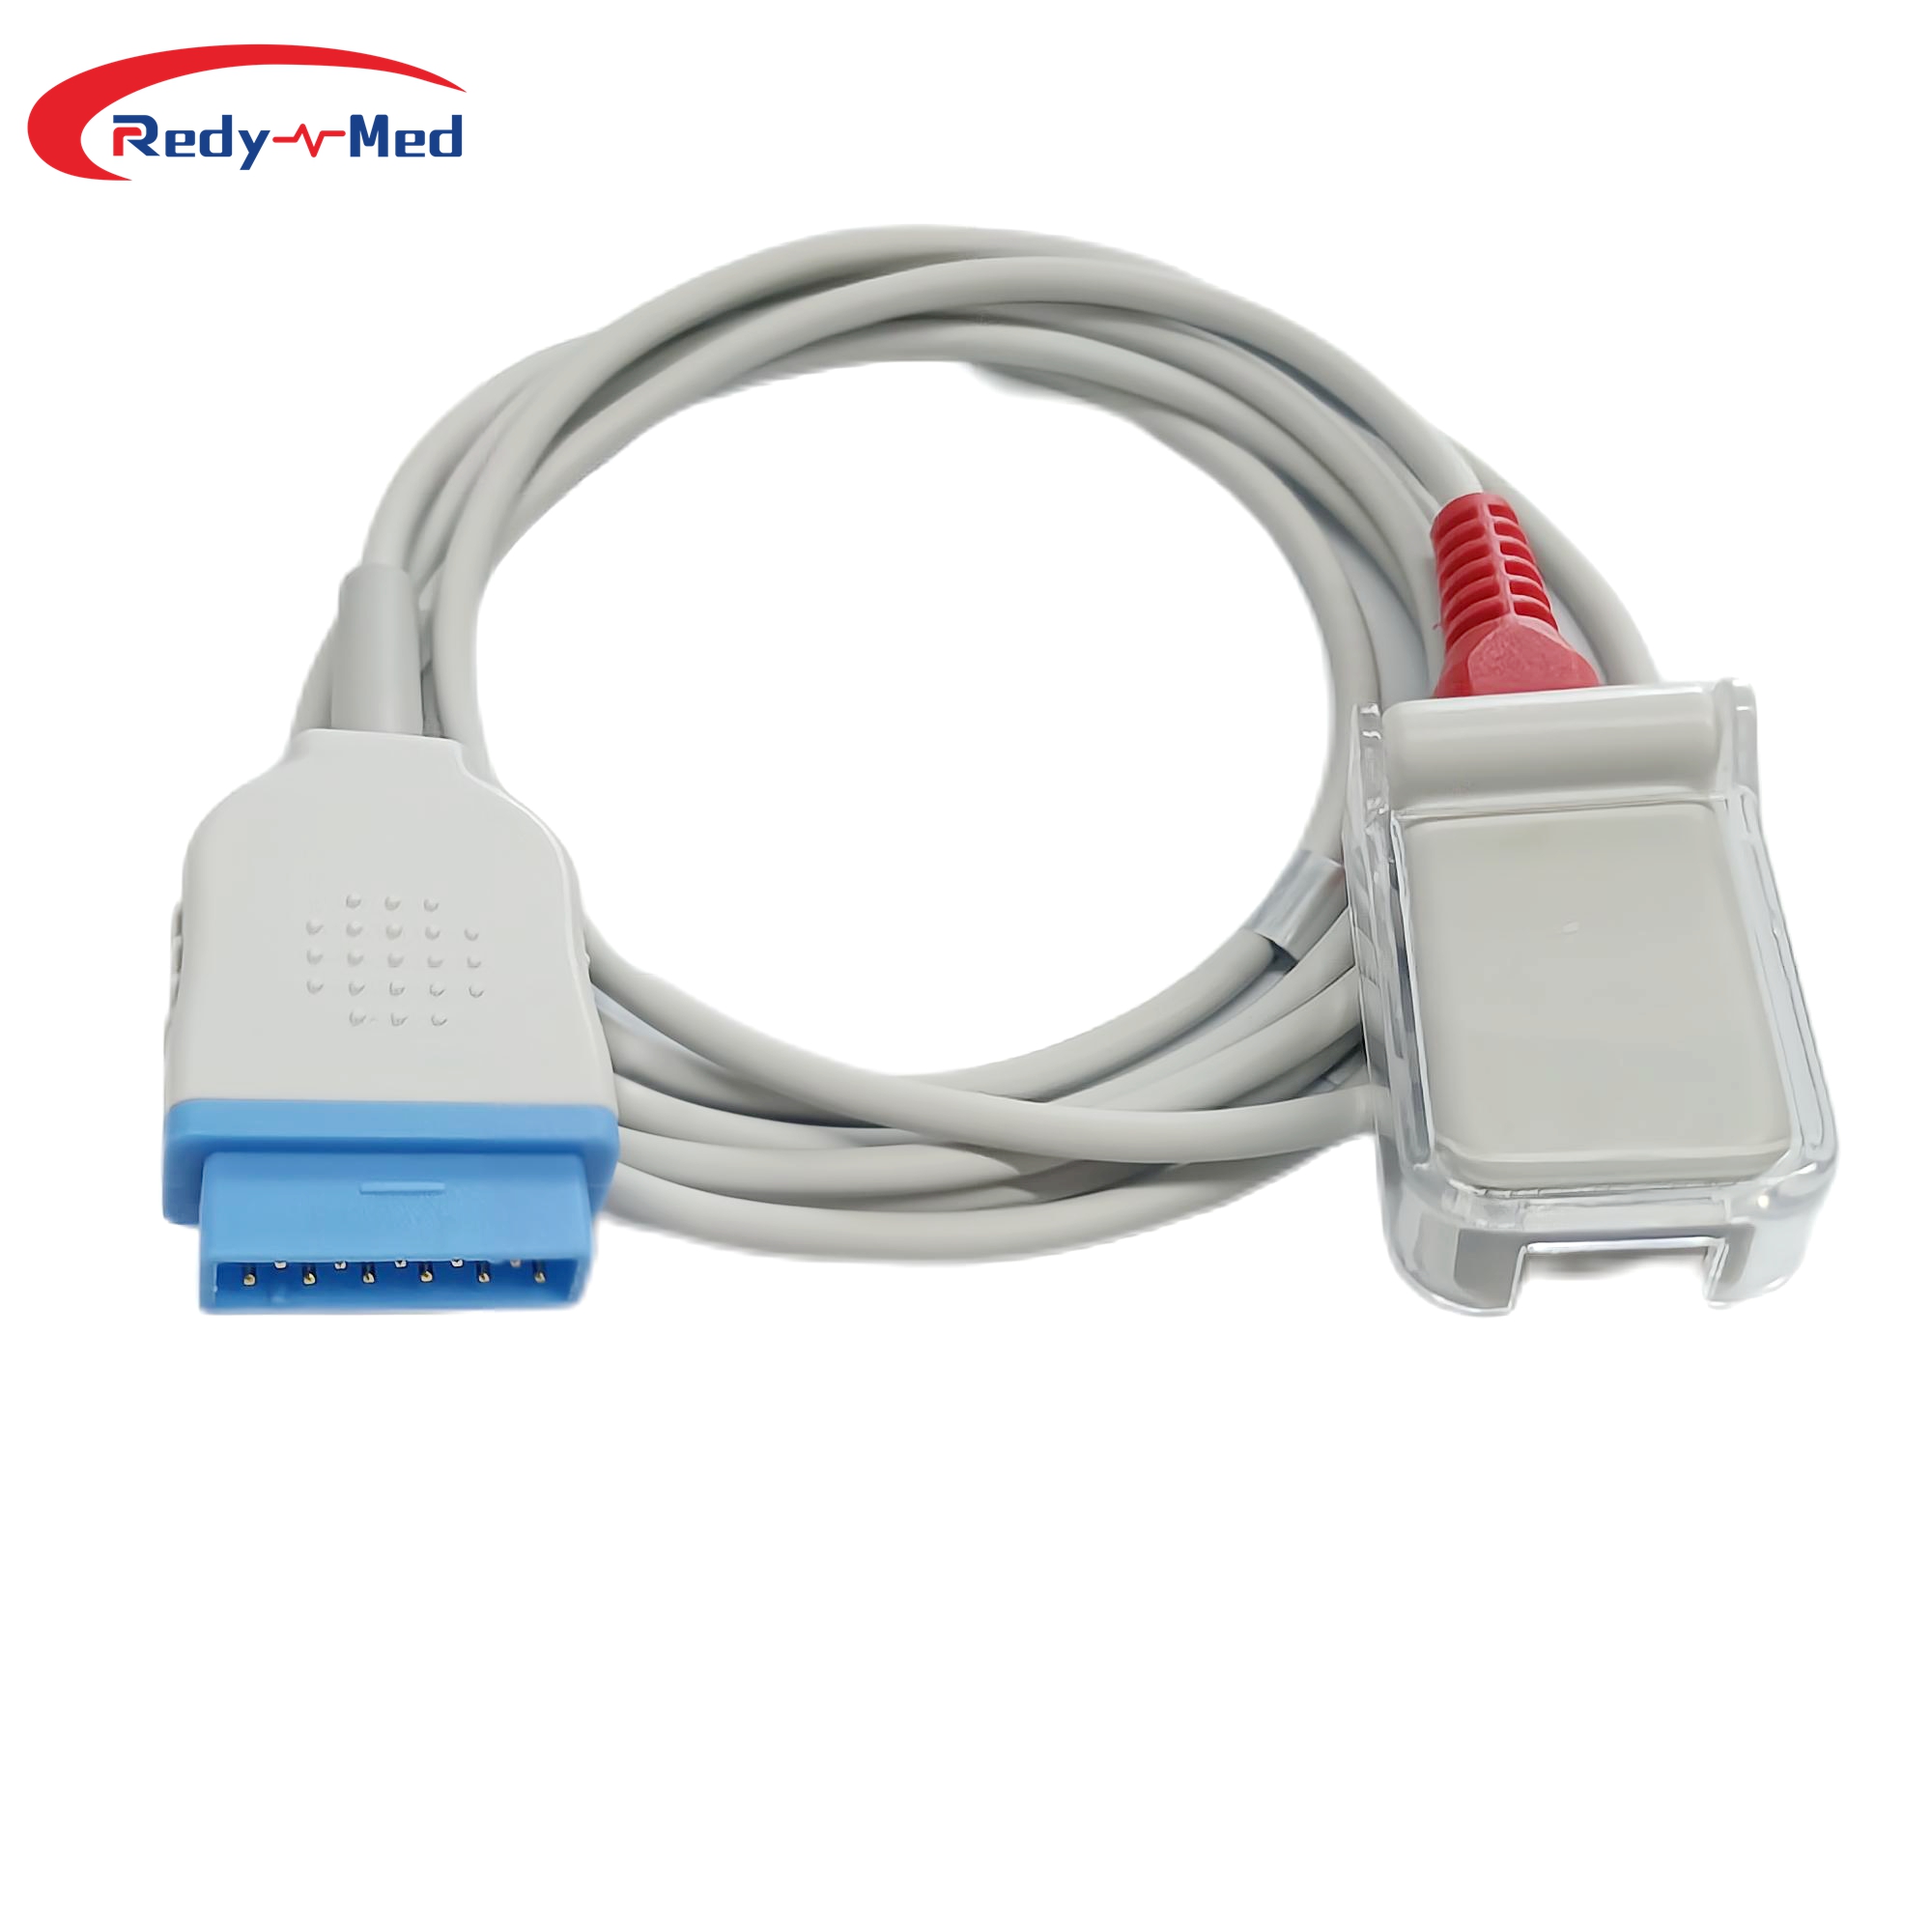 Compatible With GE/Bitmos/Mennen/Respironics/Zoll/ Physio Control Spo2 Adapter/Extension Cable (Masi